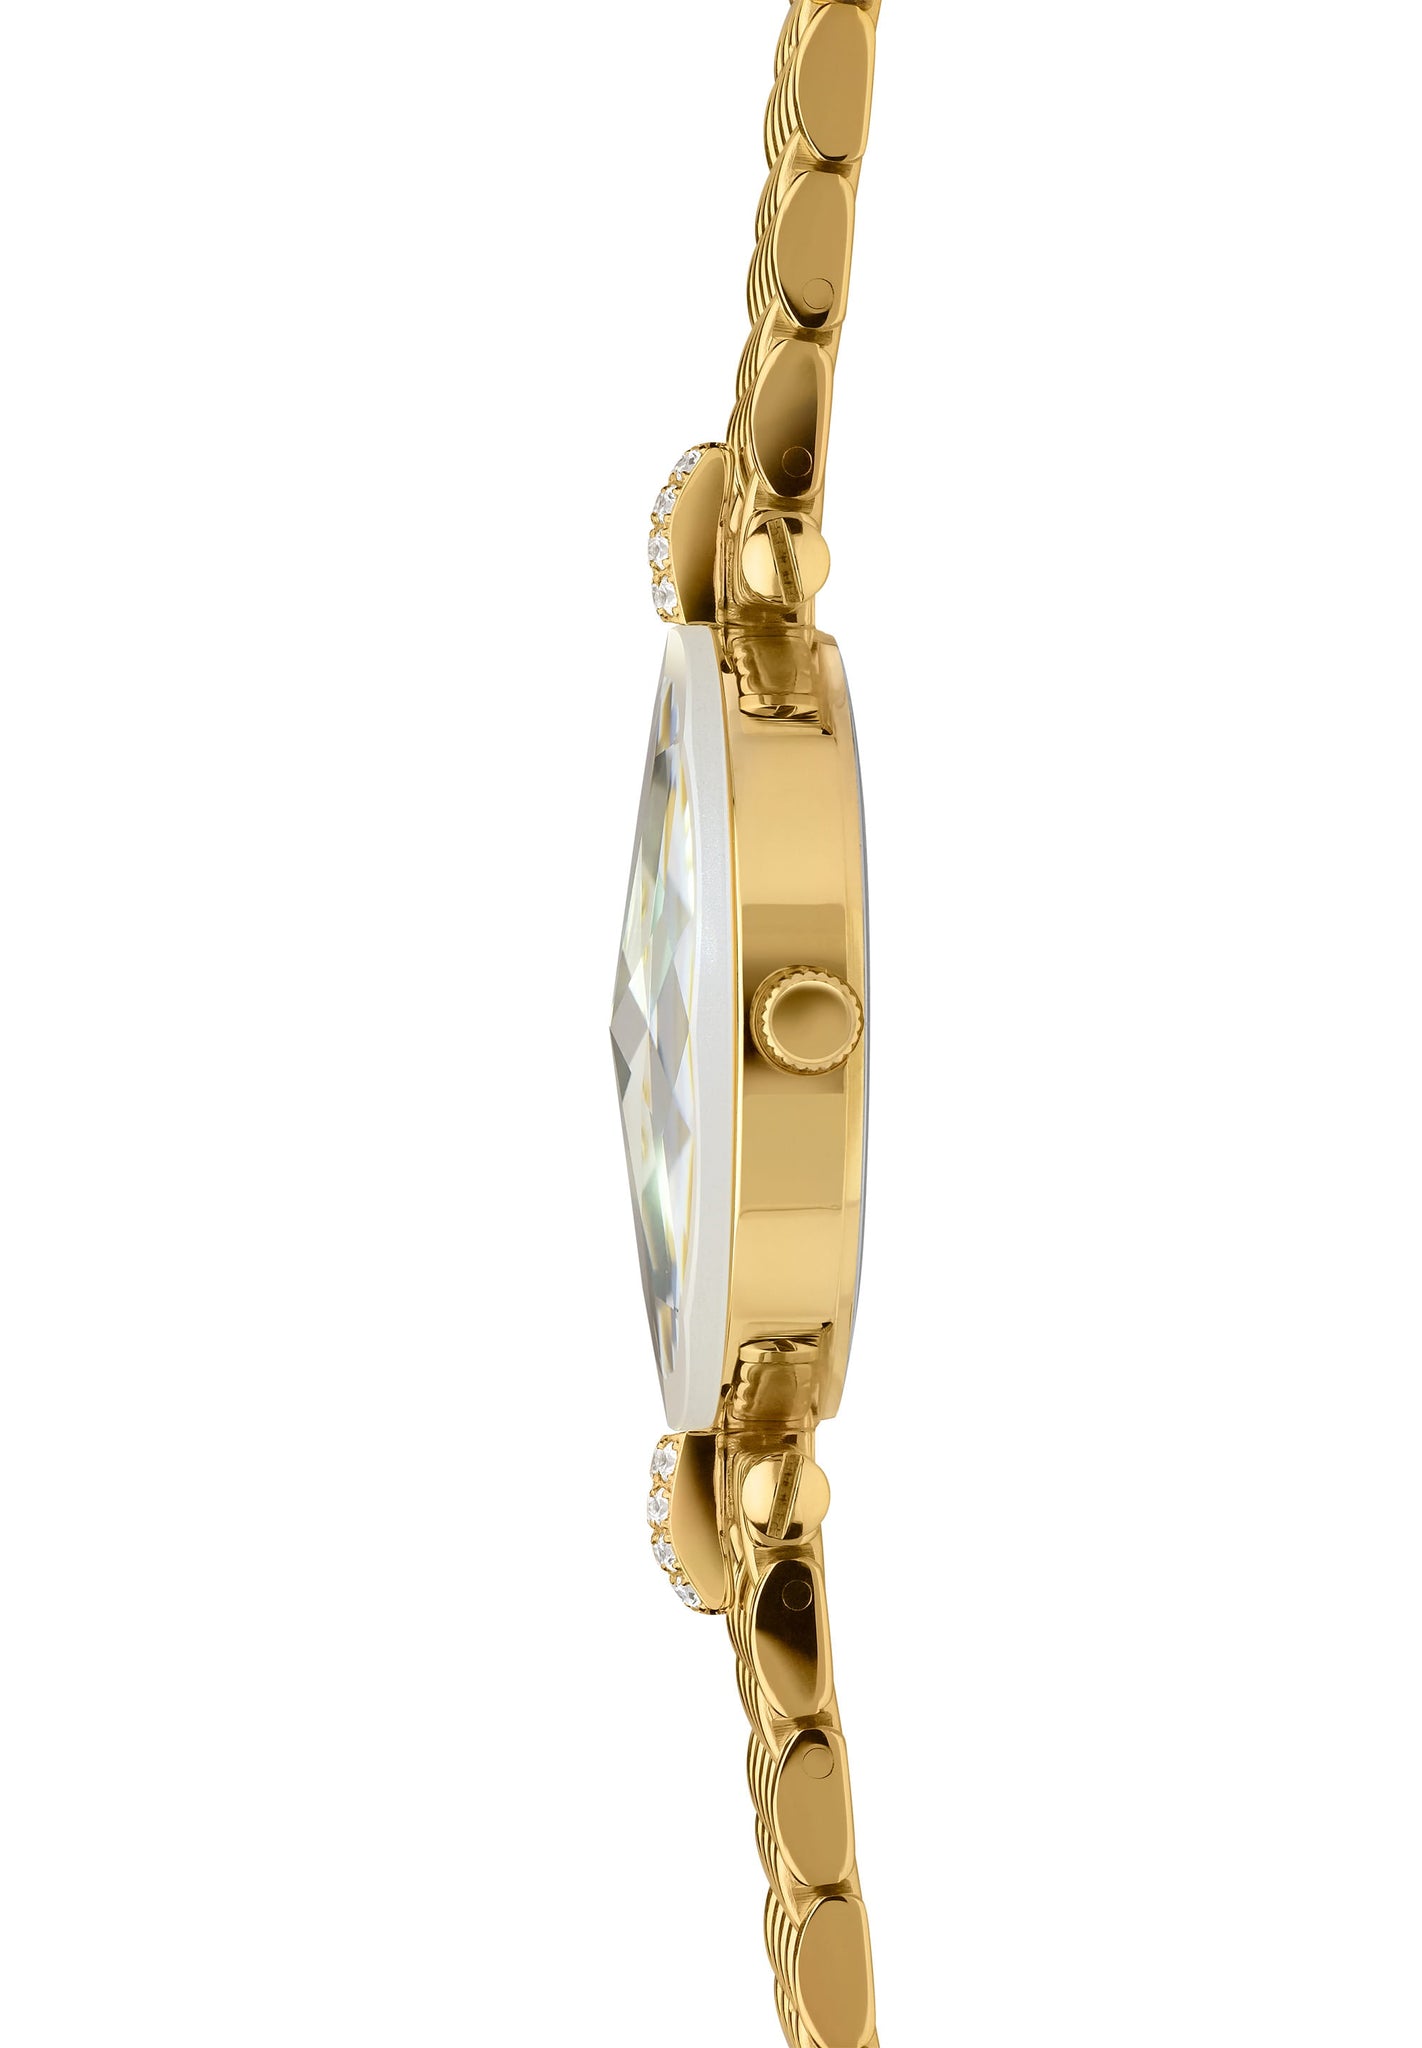 Facet Strass Reloj Mujer Suizo J5.633.M